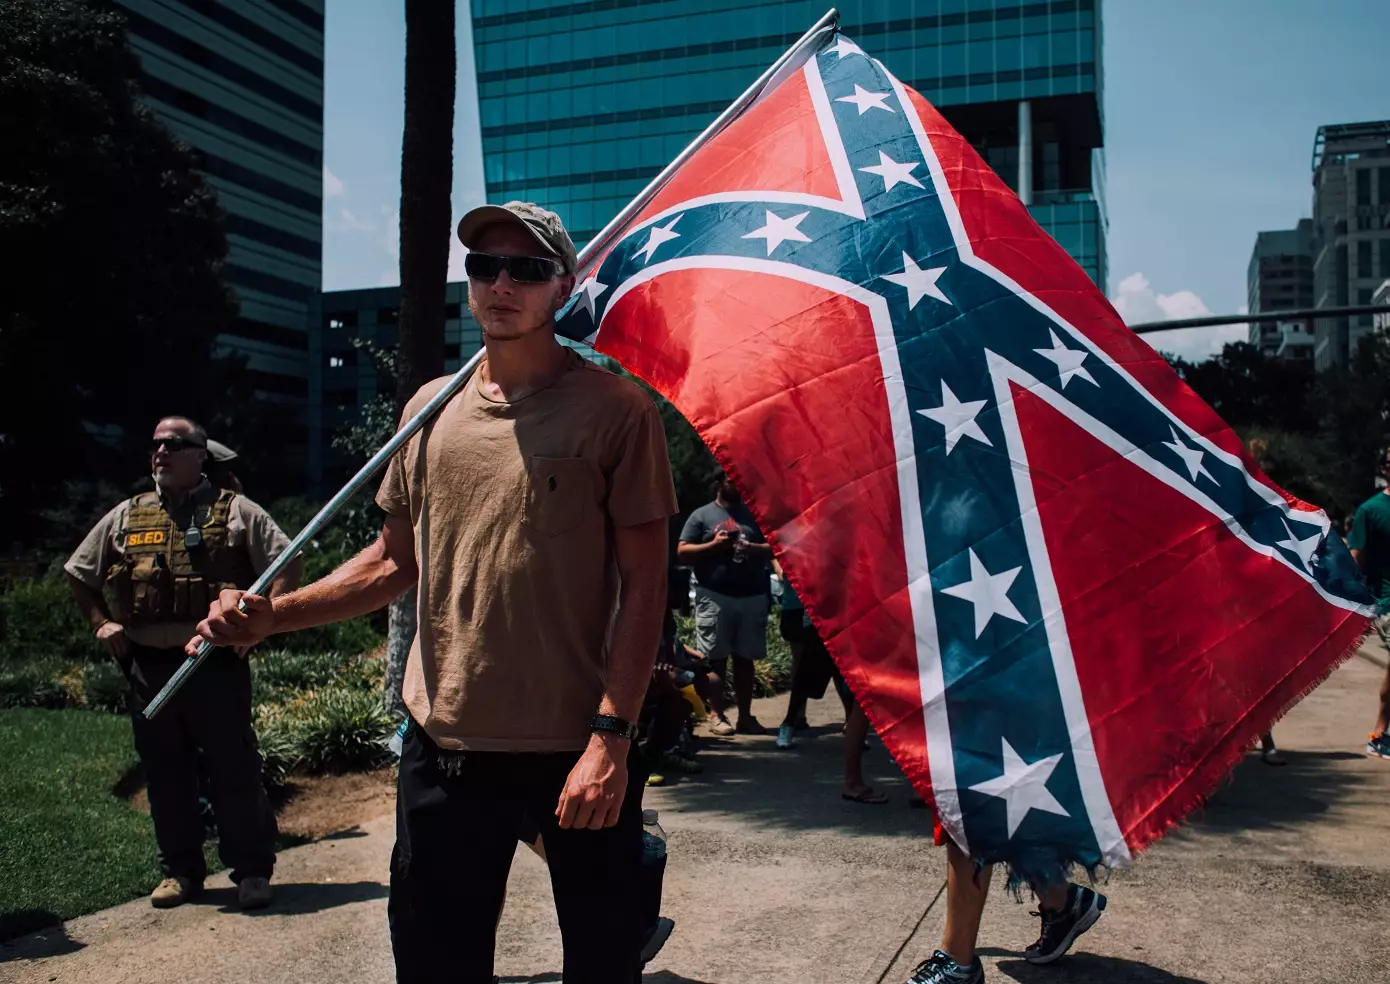 Protests erupted in 2015 when the Confederate flag was ordered off the state house of Columbia, South Carolina.